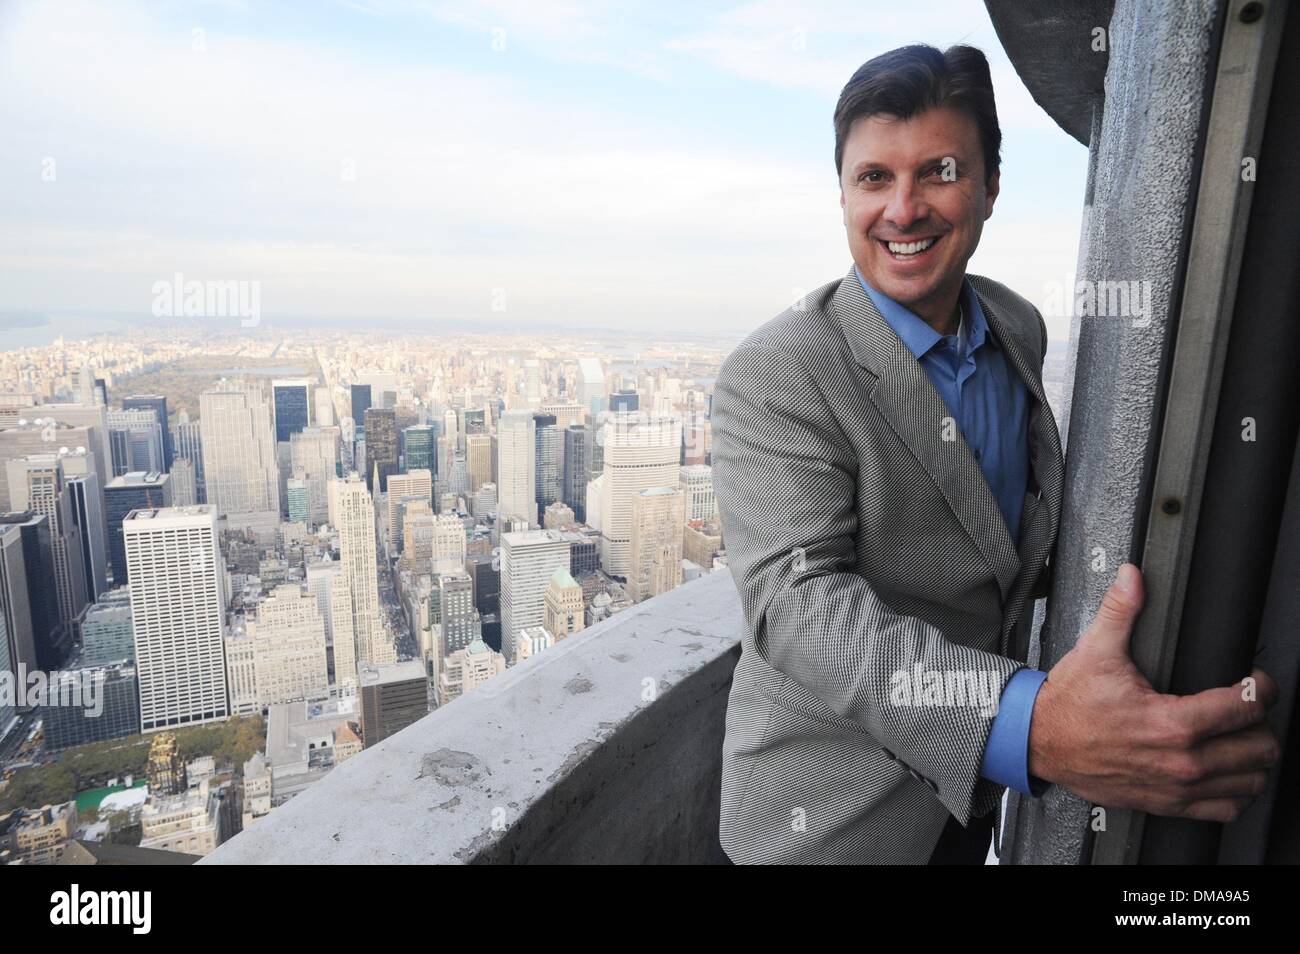 Nov 04, 2009 - Manhattan, New York, USA - New York Yankee great and four-time World Series champion TINO MARTINEZ, looking from the 103rd floor parapet, lights and tours the Empire State Building to wish the Bronx Bombers good and celebrate the playing of Game 6 against the Philadelphia Phillies at Yankee Stadium tonight.  (Credit Image: Â© Bryan Smith/ZUMA Press) RESTRICTIONS:  *  Stock Photo